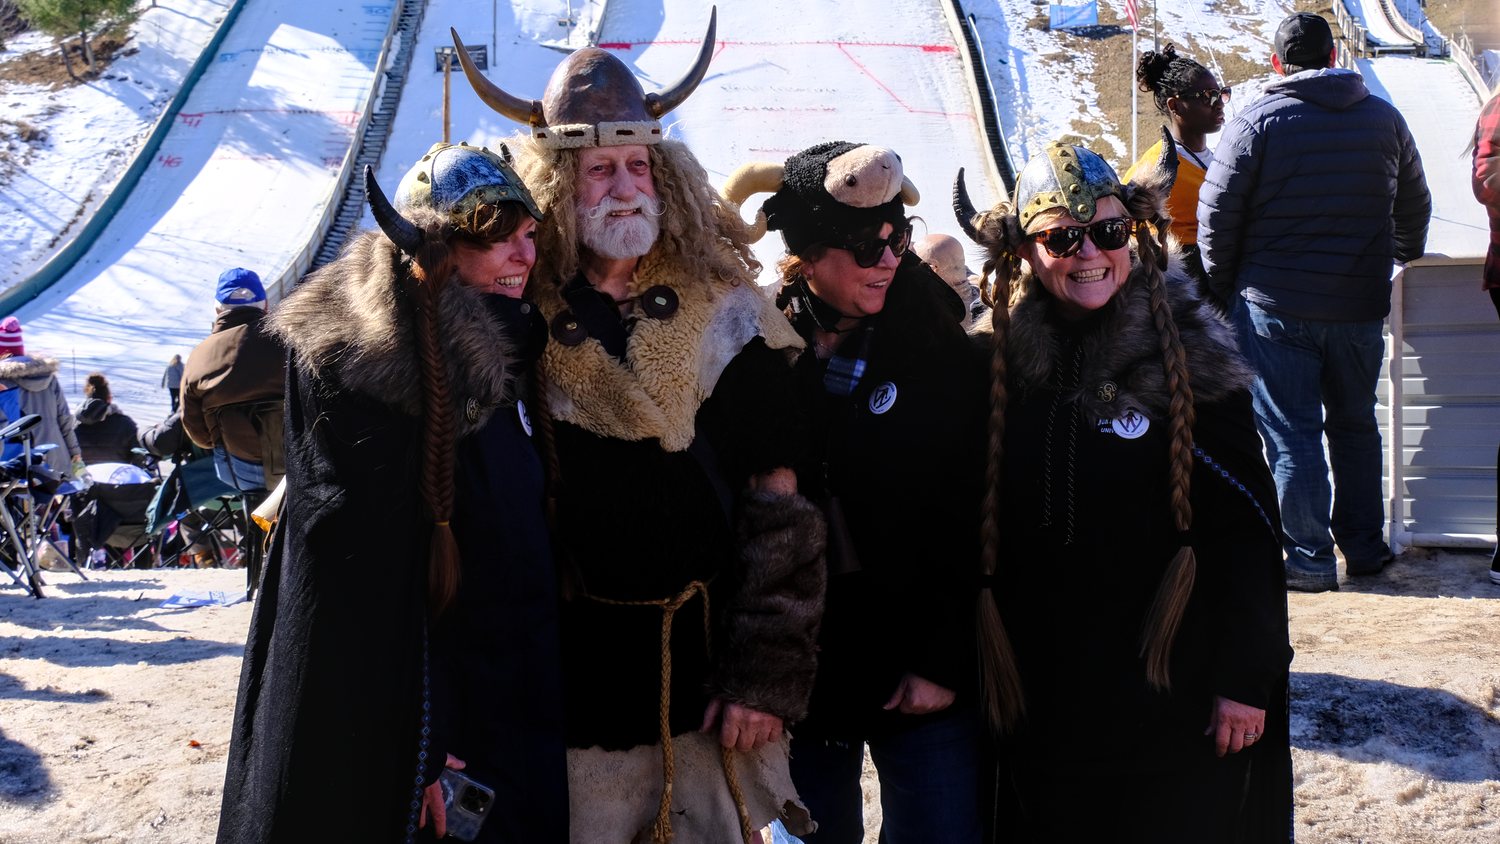 Posing with Marty the Viking at the 118th Annual Norge Ski Club Winter Tournament.